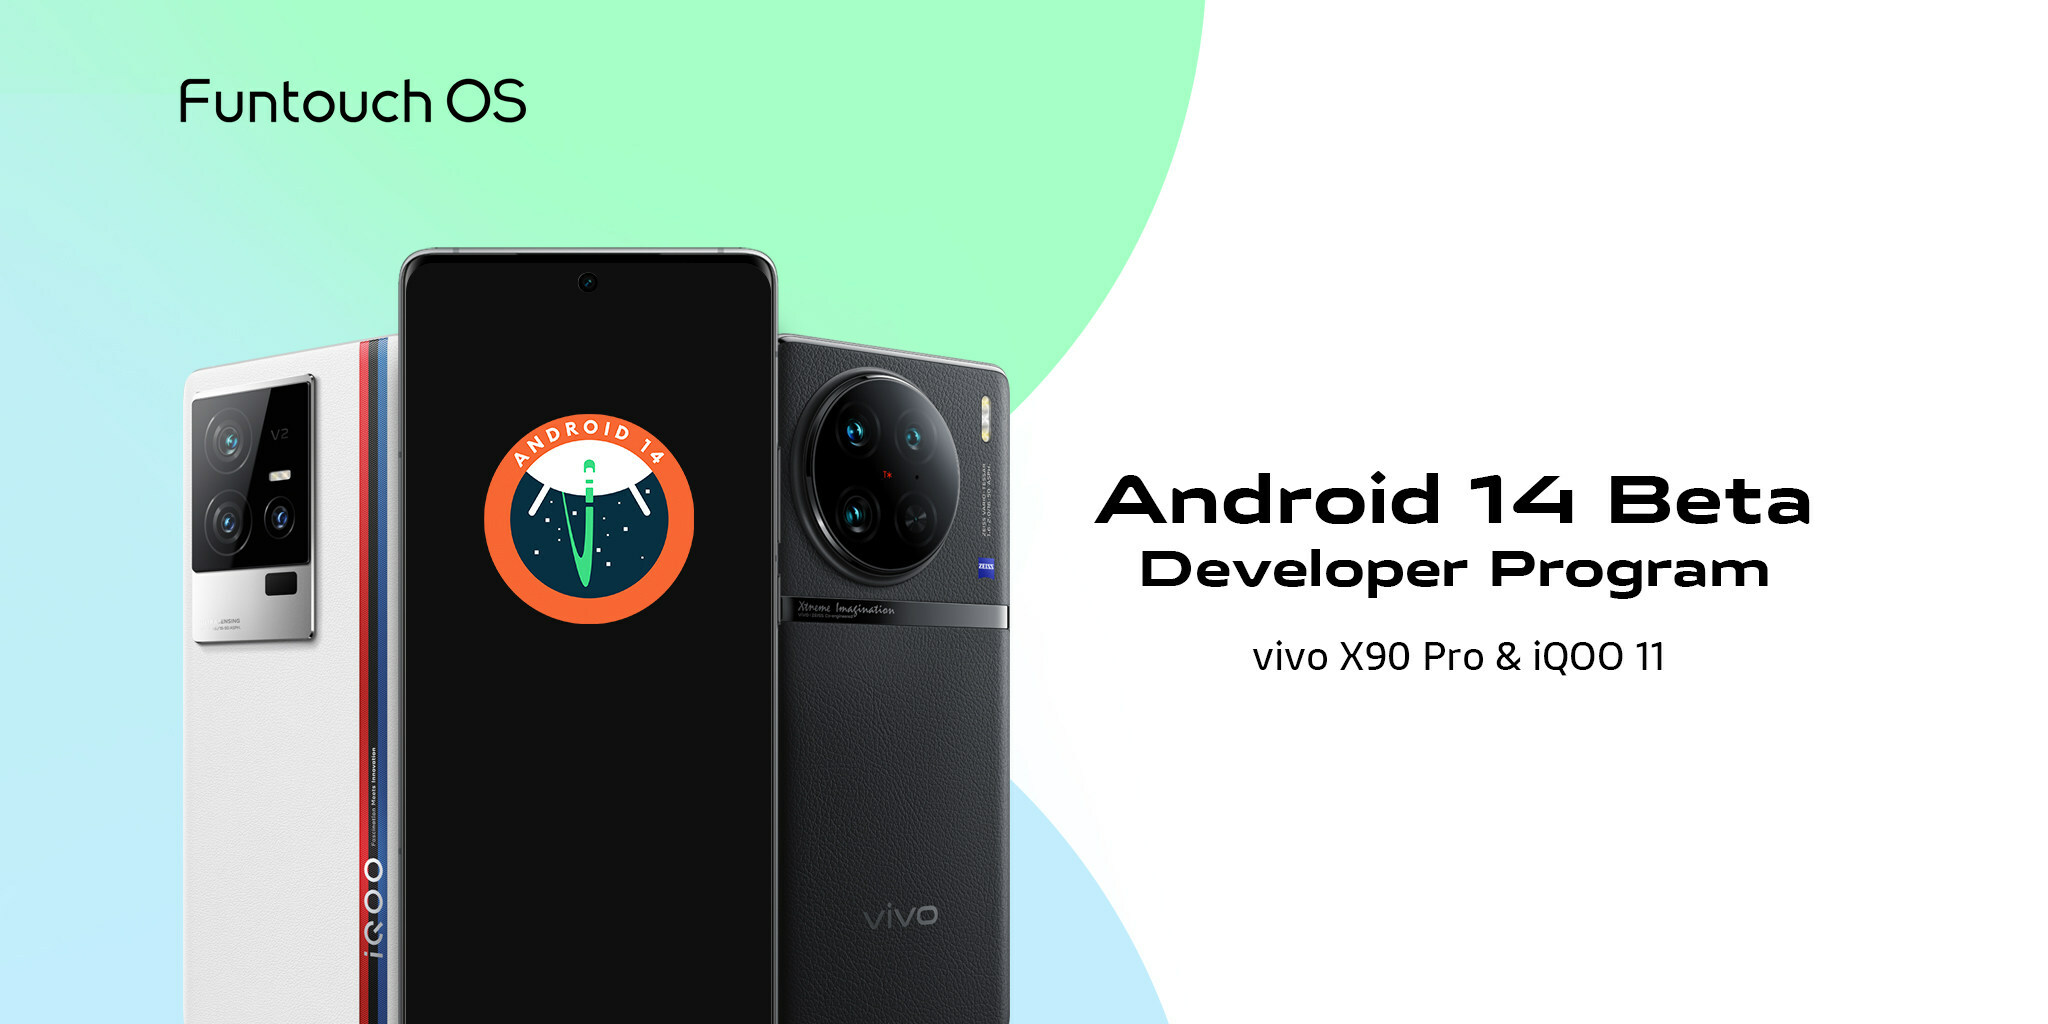 Image of vivo Releases Android 14 Beta Program for Developers on vivo X90 Pro and iQOO 11